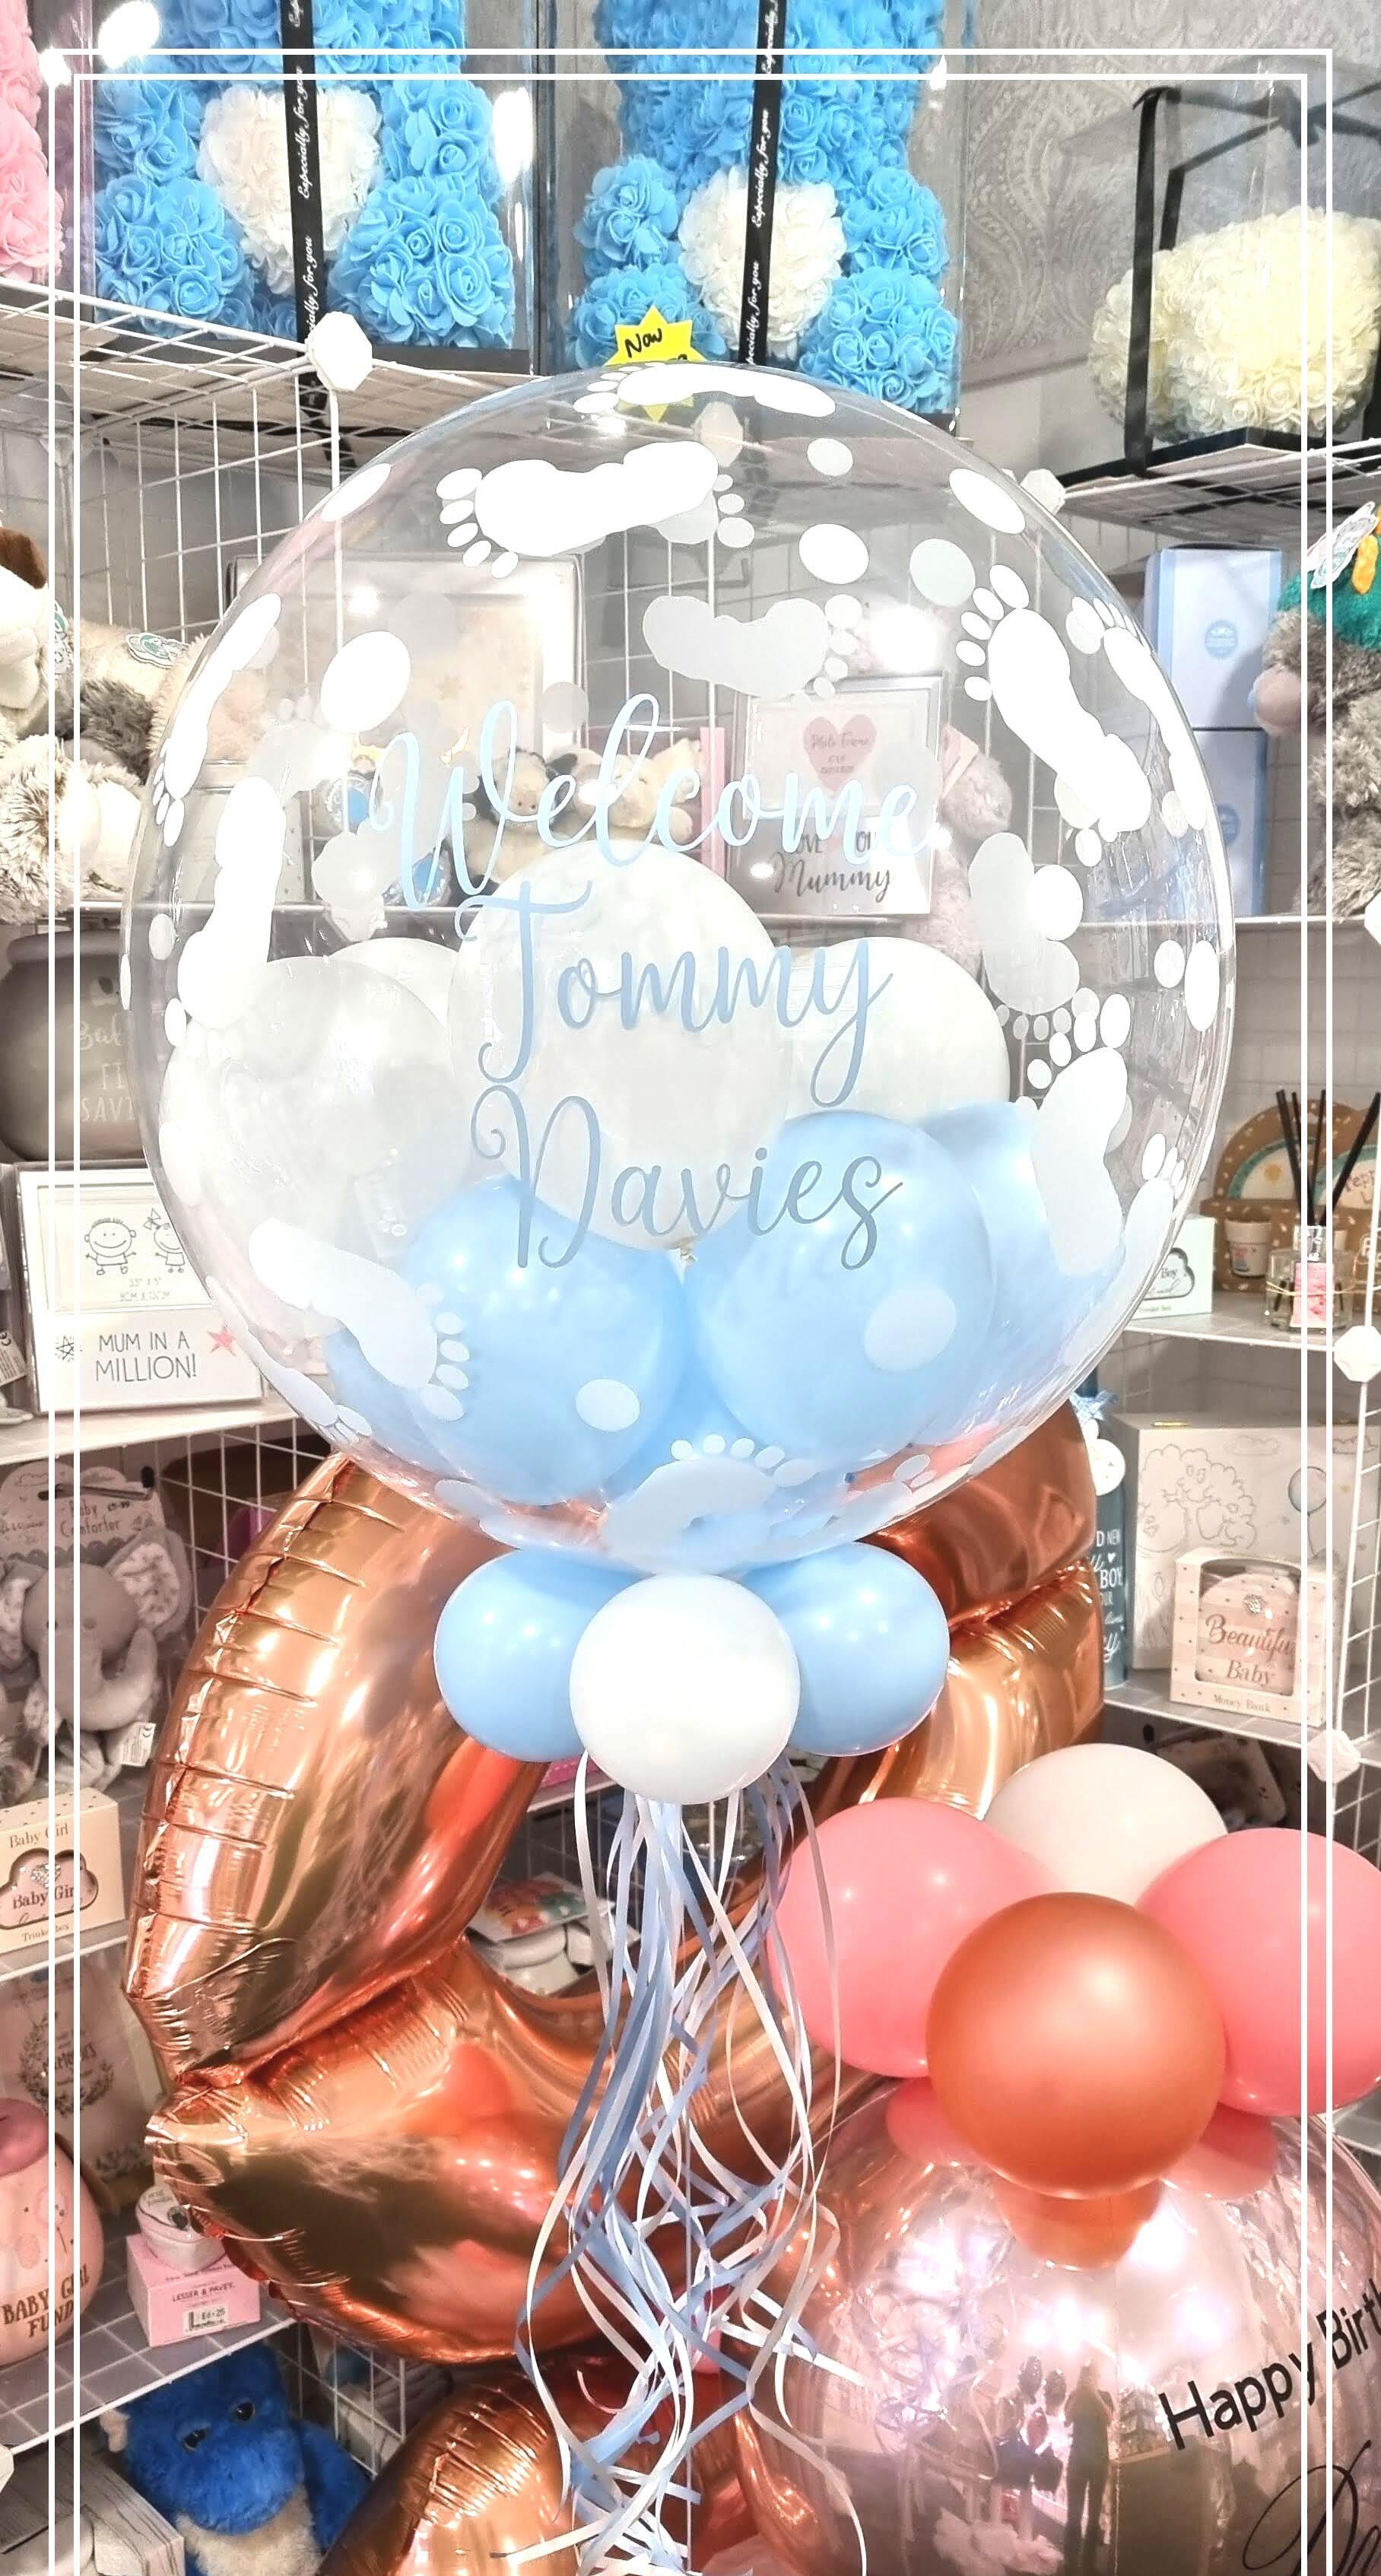 24 Inch Personalised Gumball Balloons in a baby design